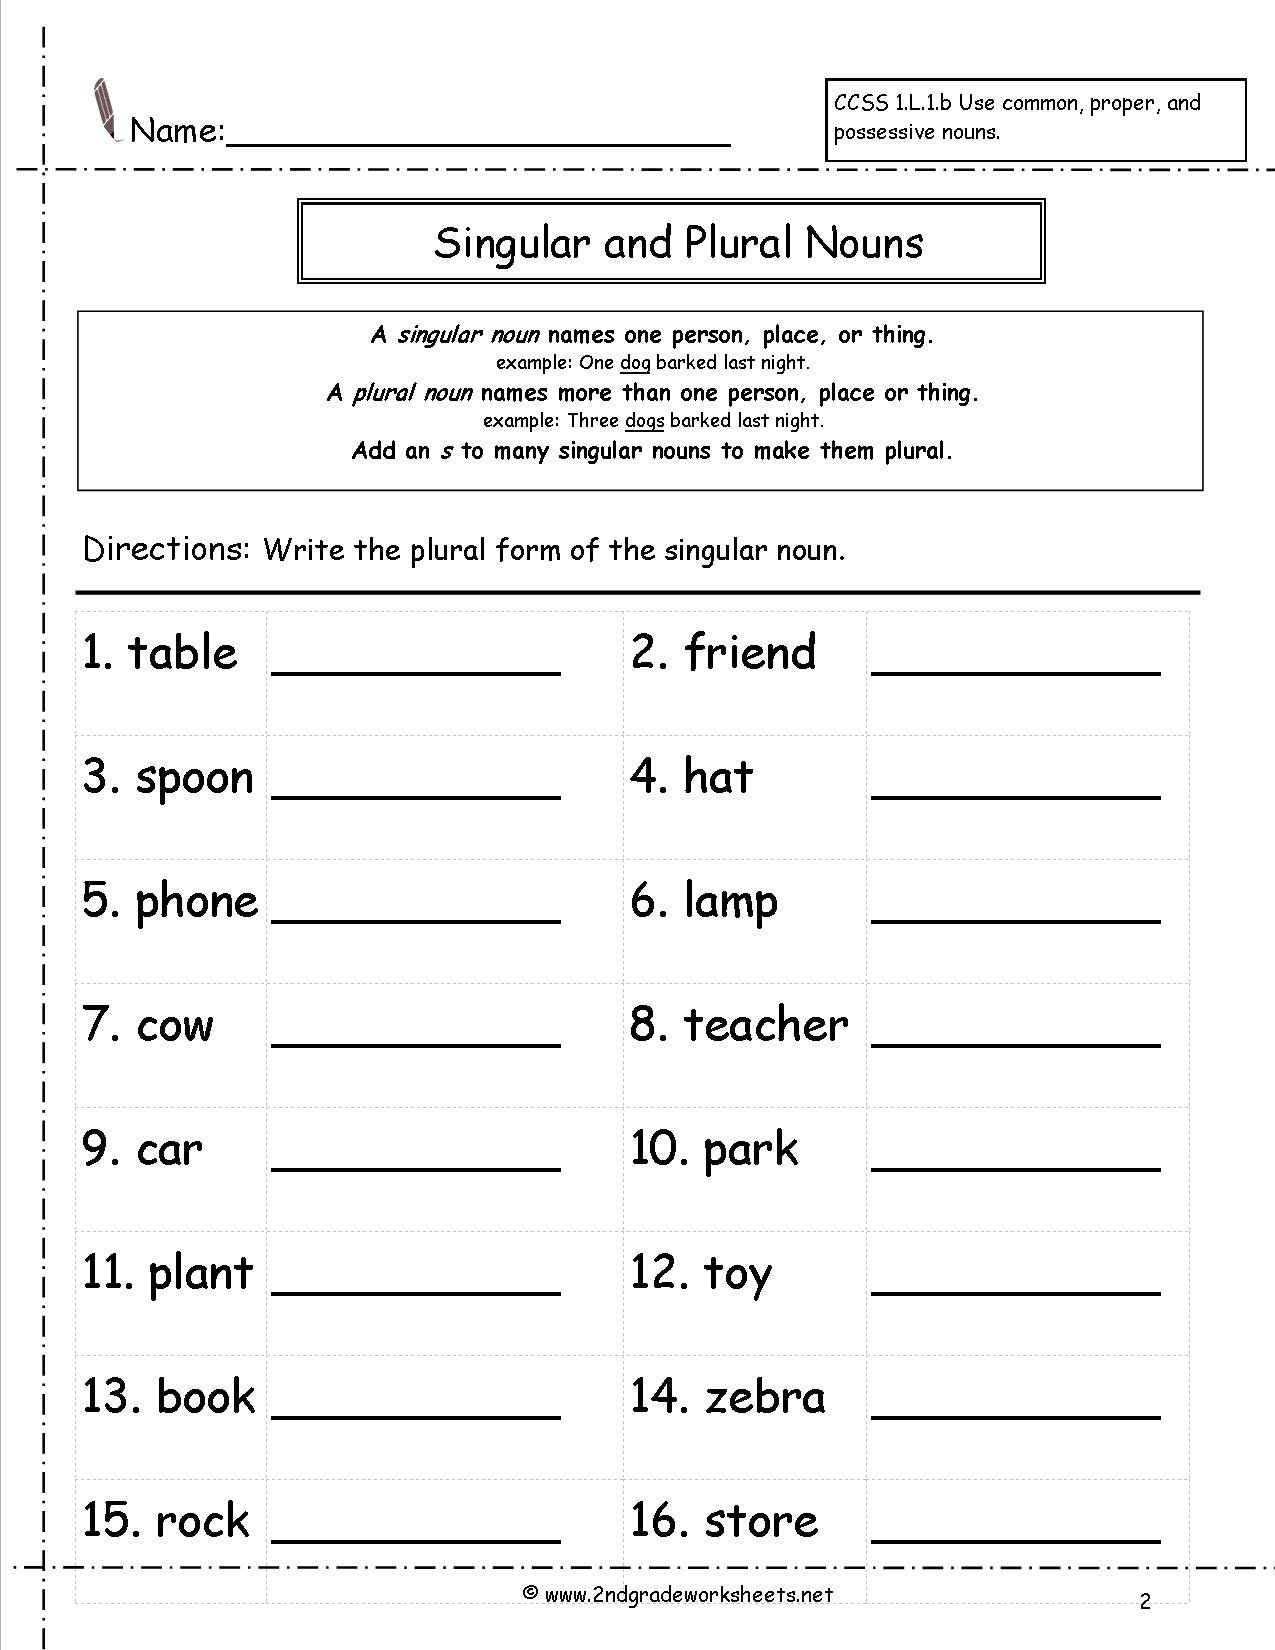 Plurals Worksheets Free The Best Worksheets Image Collection